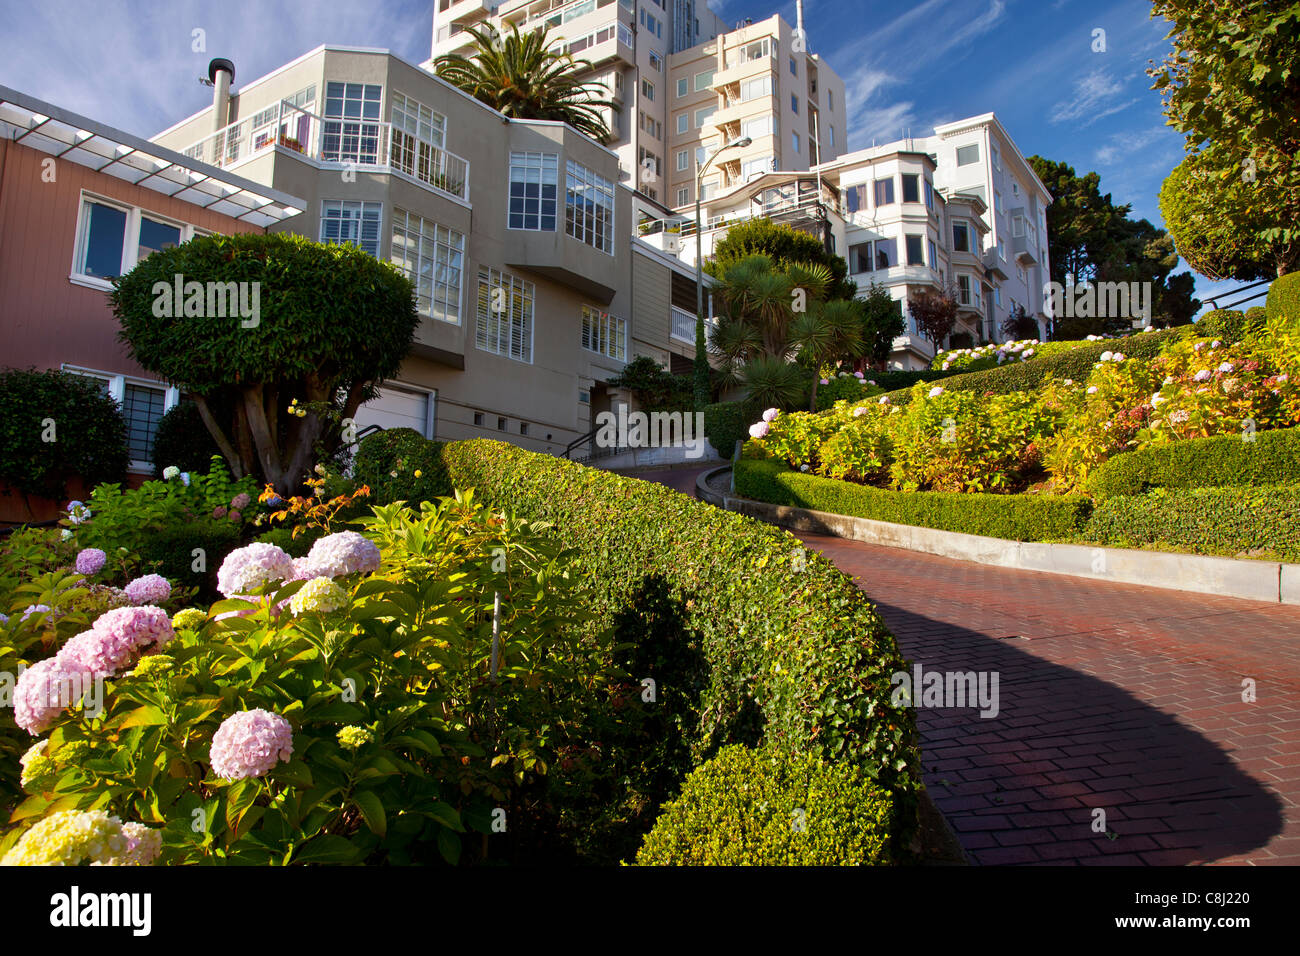 Flower lined Lombard Street in San Francisco California USA Stock Photo